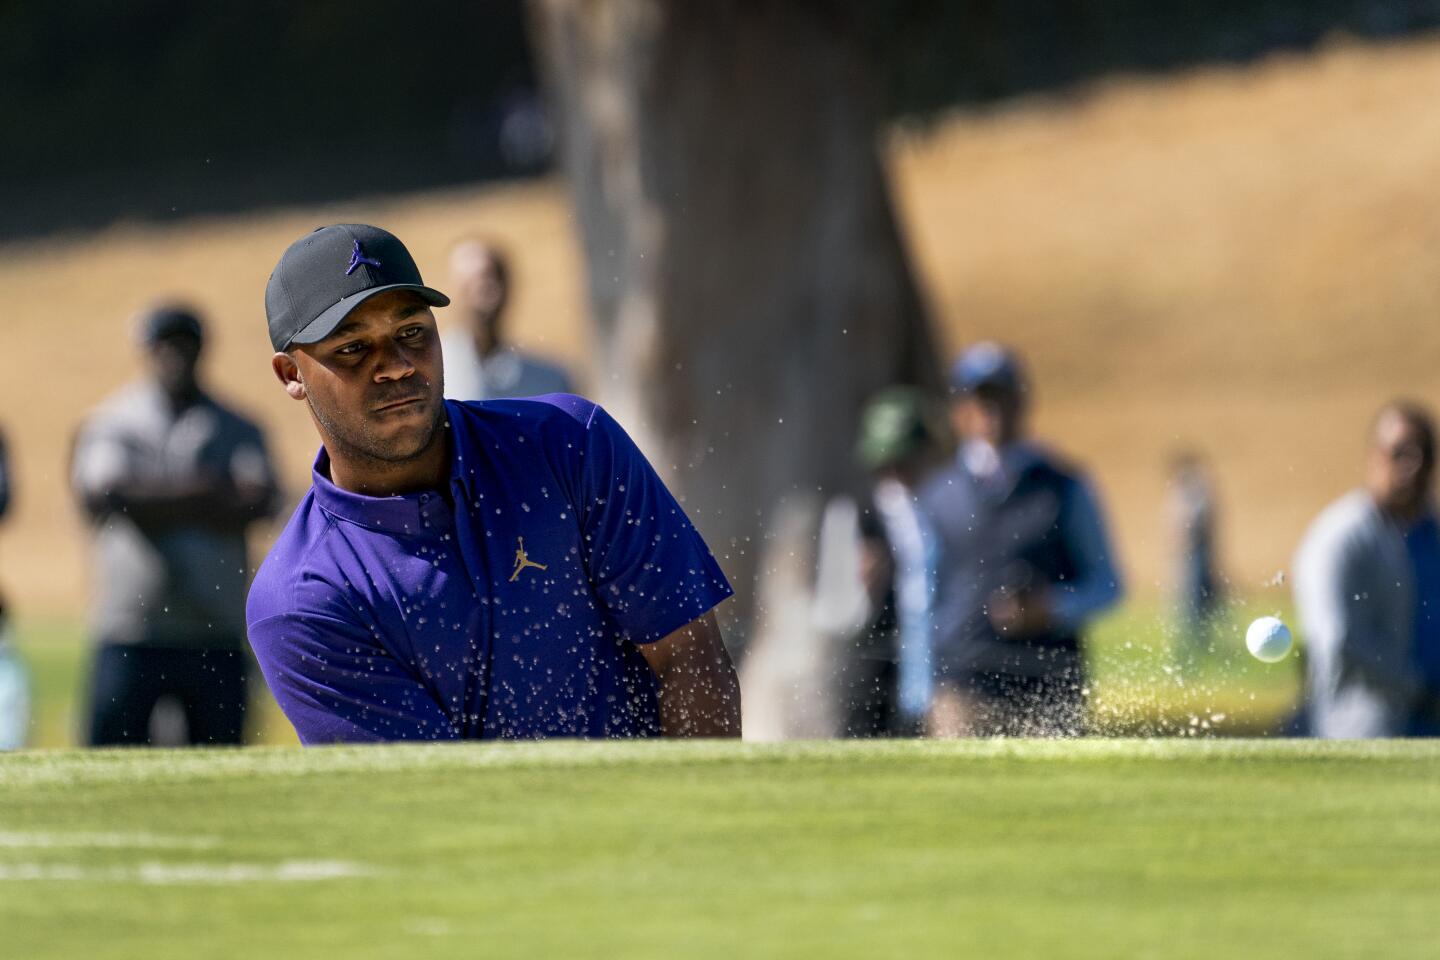 Harold Varner III hits out of a bunker and onto the 10th hole green during the final round of the Genesis Invitational at Riviera Country Club on Feb. 16, 2020.